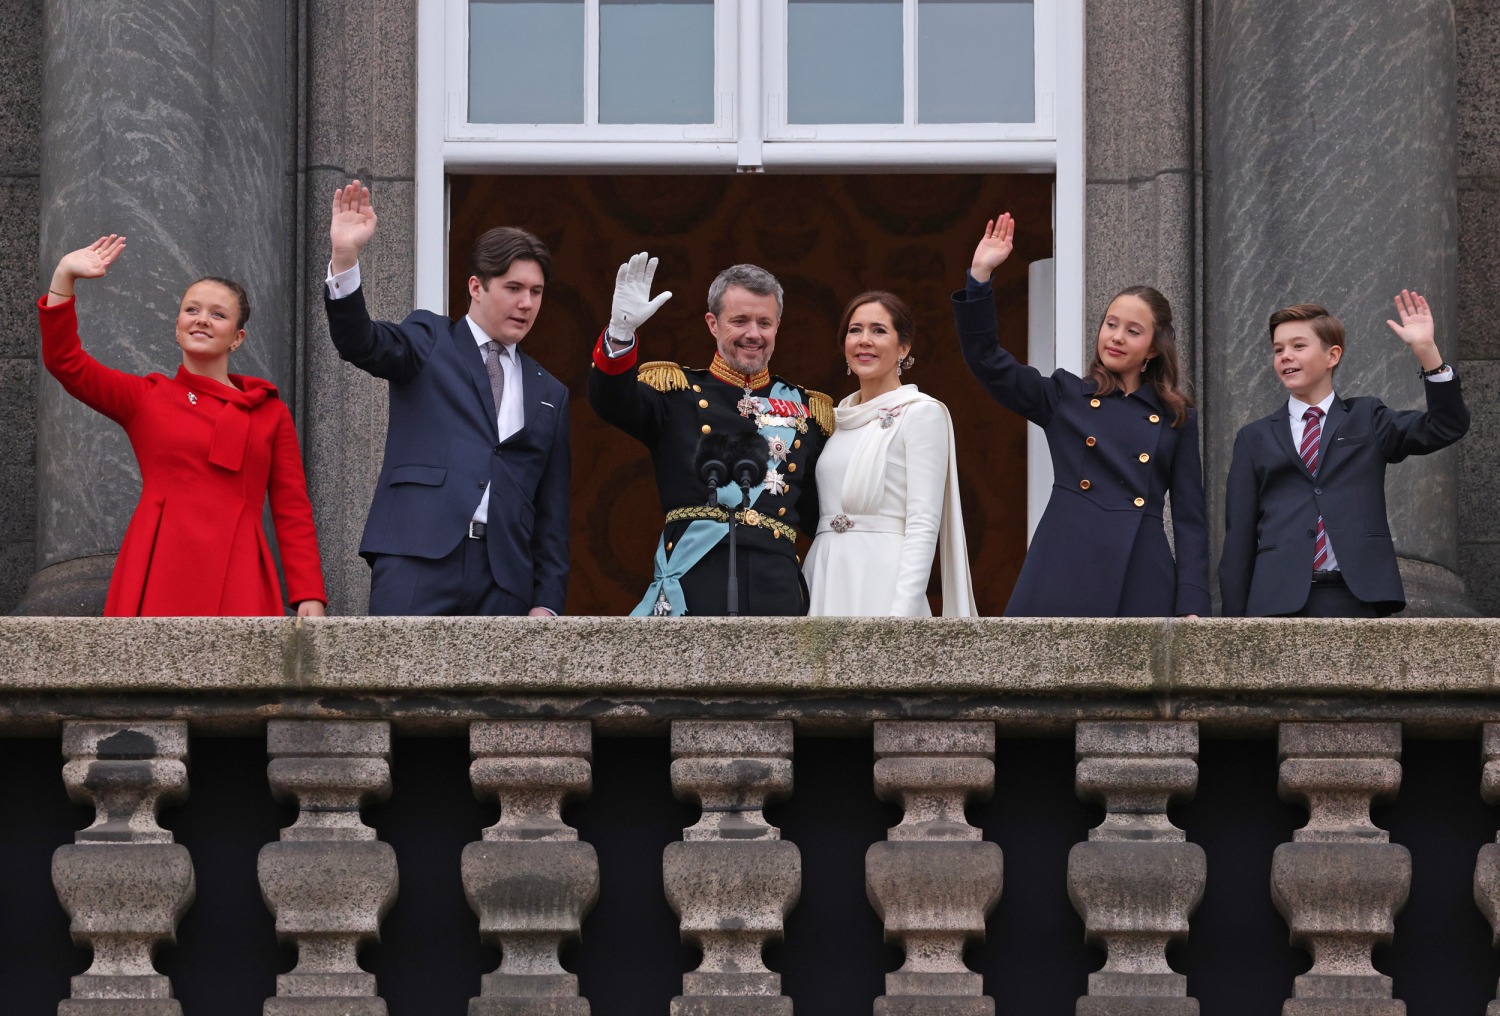 Denmark's Frederik X becomes king after Queen Margrethe abdicates